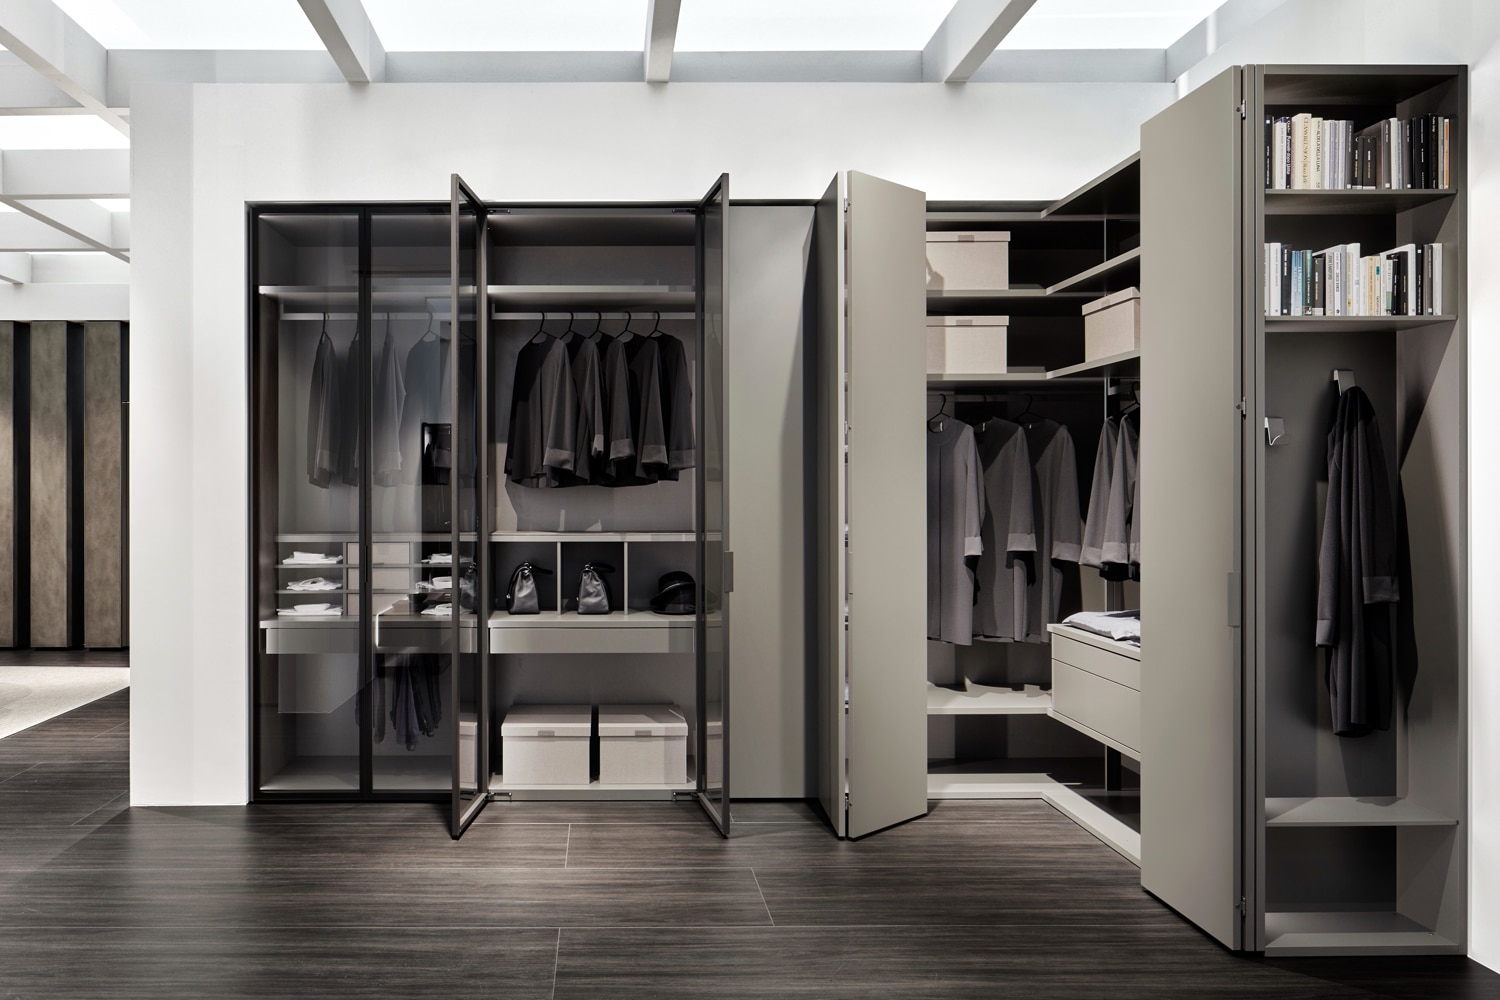 Corner closet in Ombra matte lacquer. Core model with bi-folding doors plus hinged doors in framed fume' glass. 